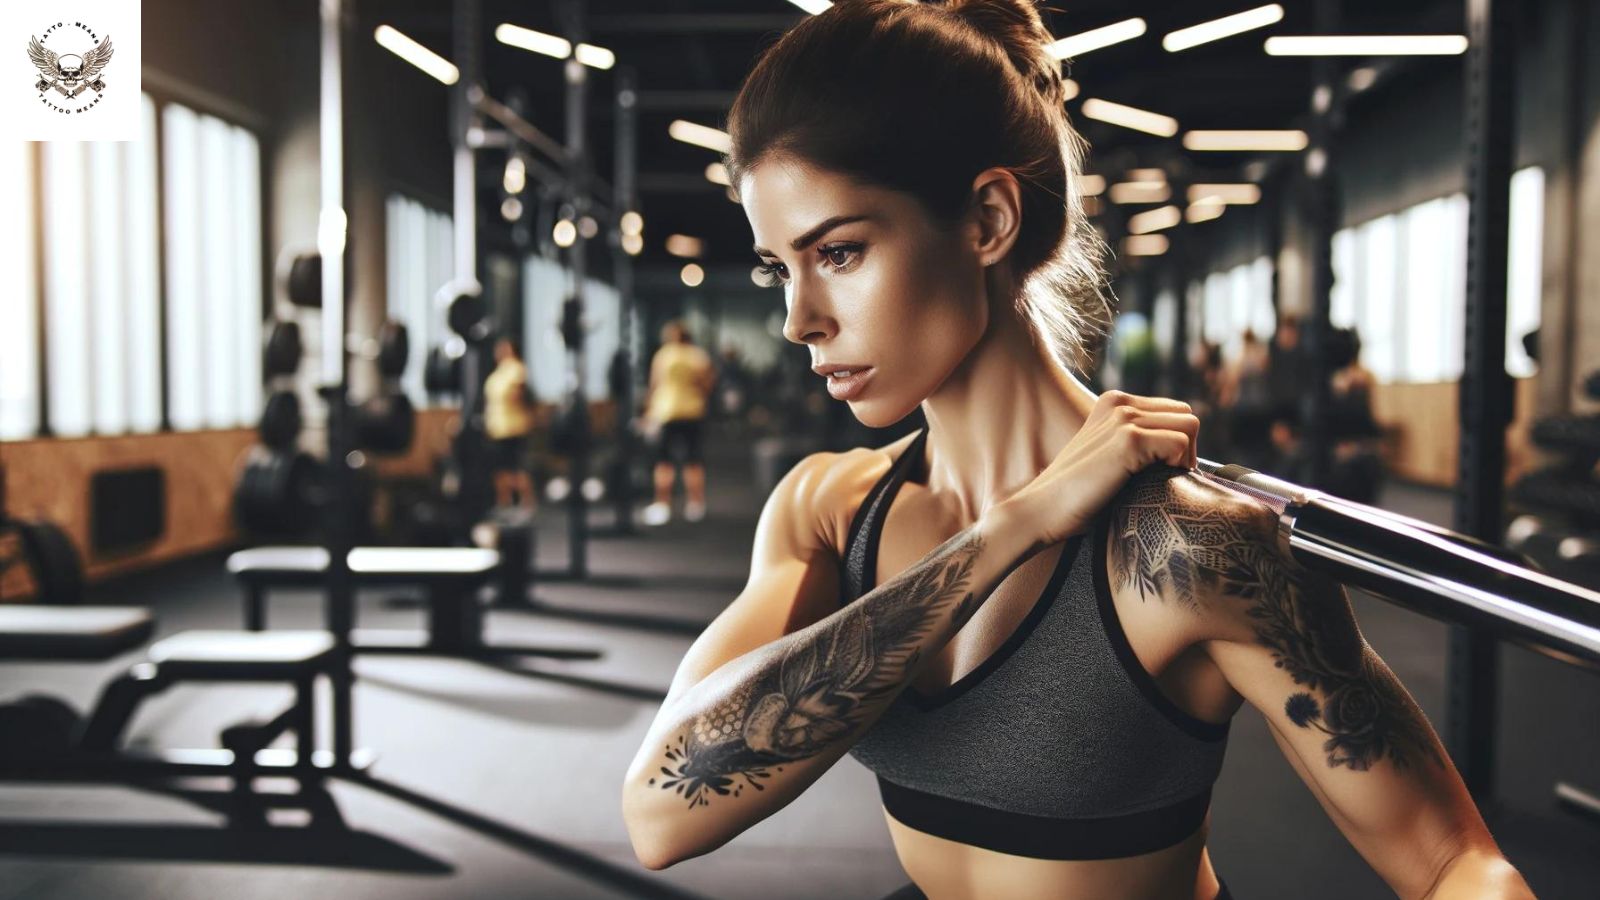 Tips For Safely Working Out After a Tattoo